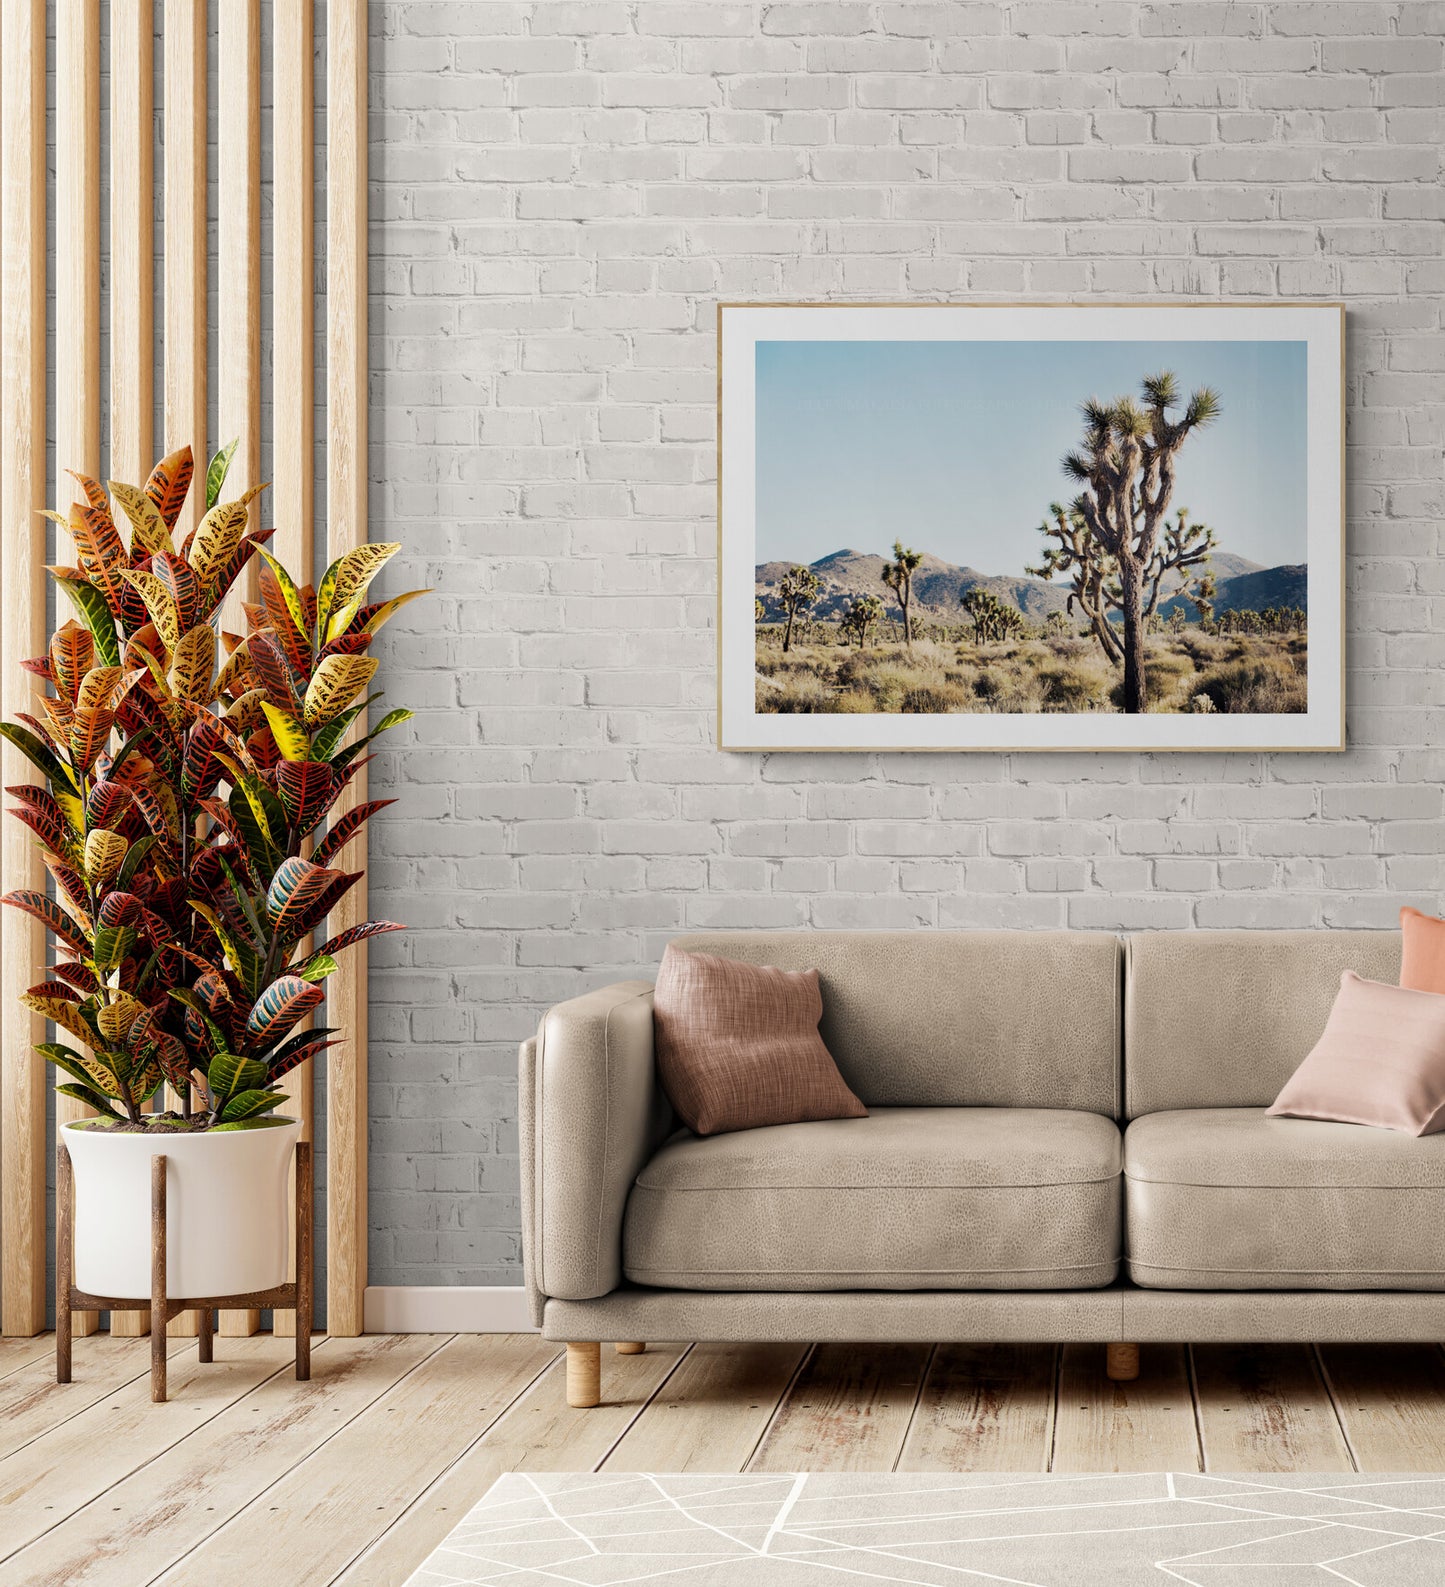 Joshua Tree National Park Photograph Print in a living room as wall art